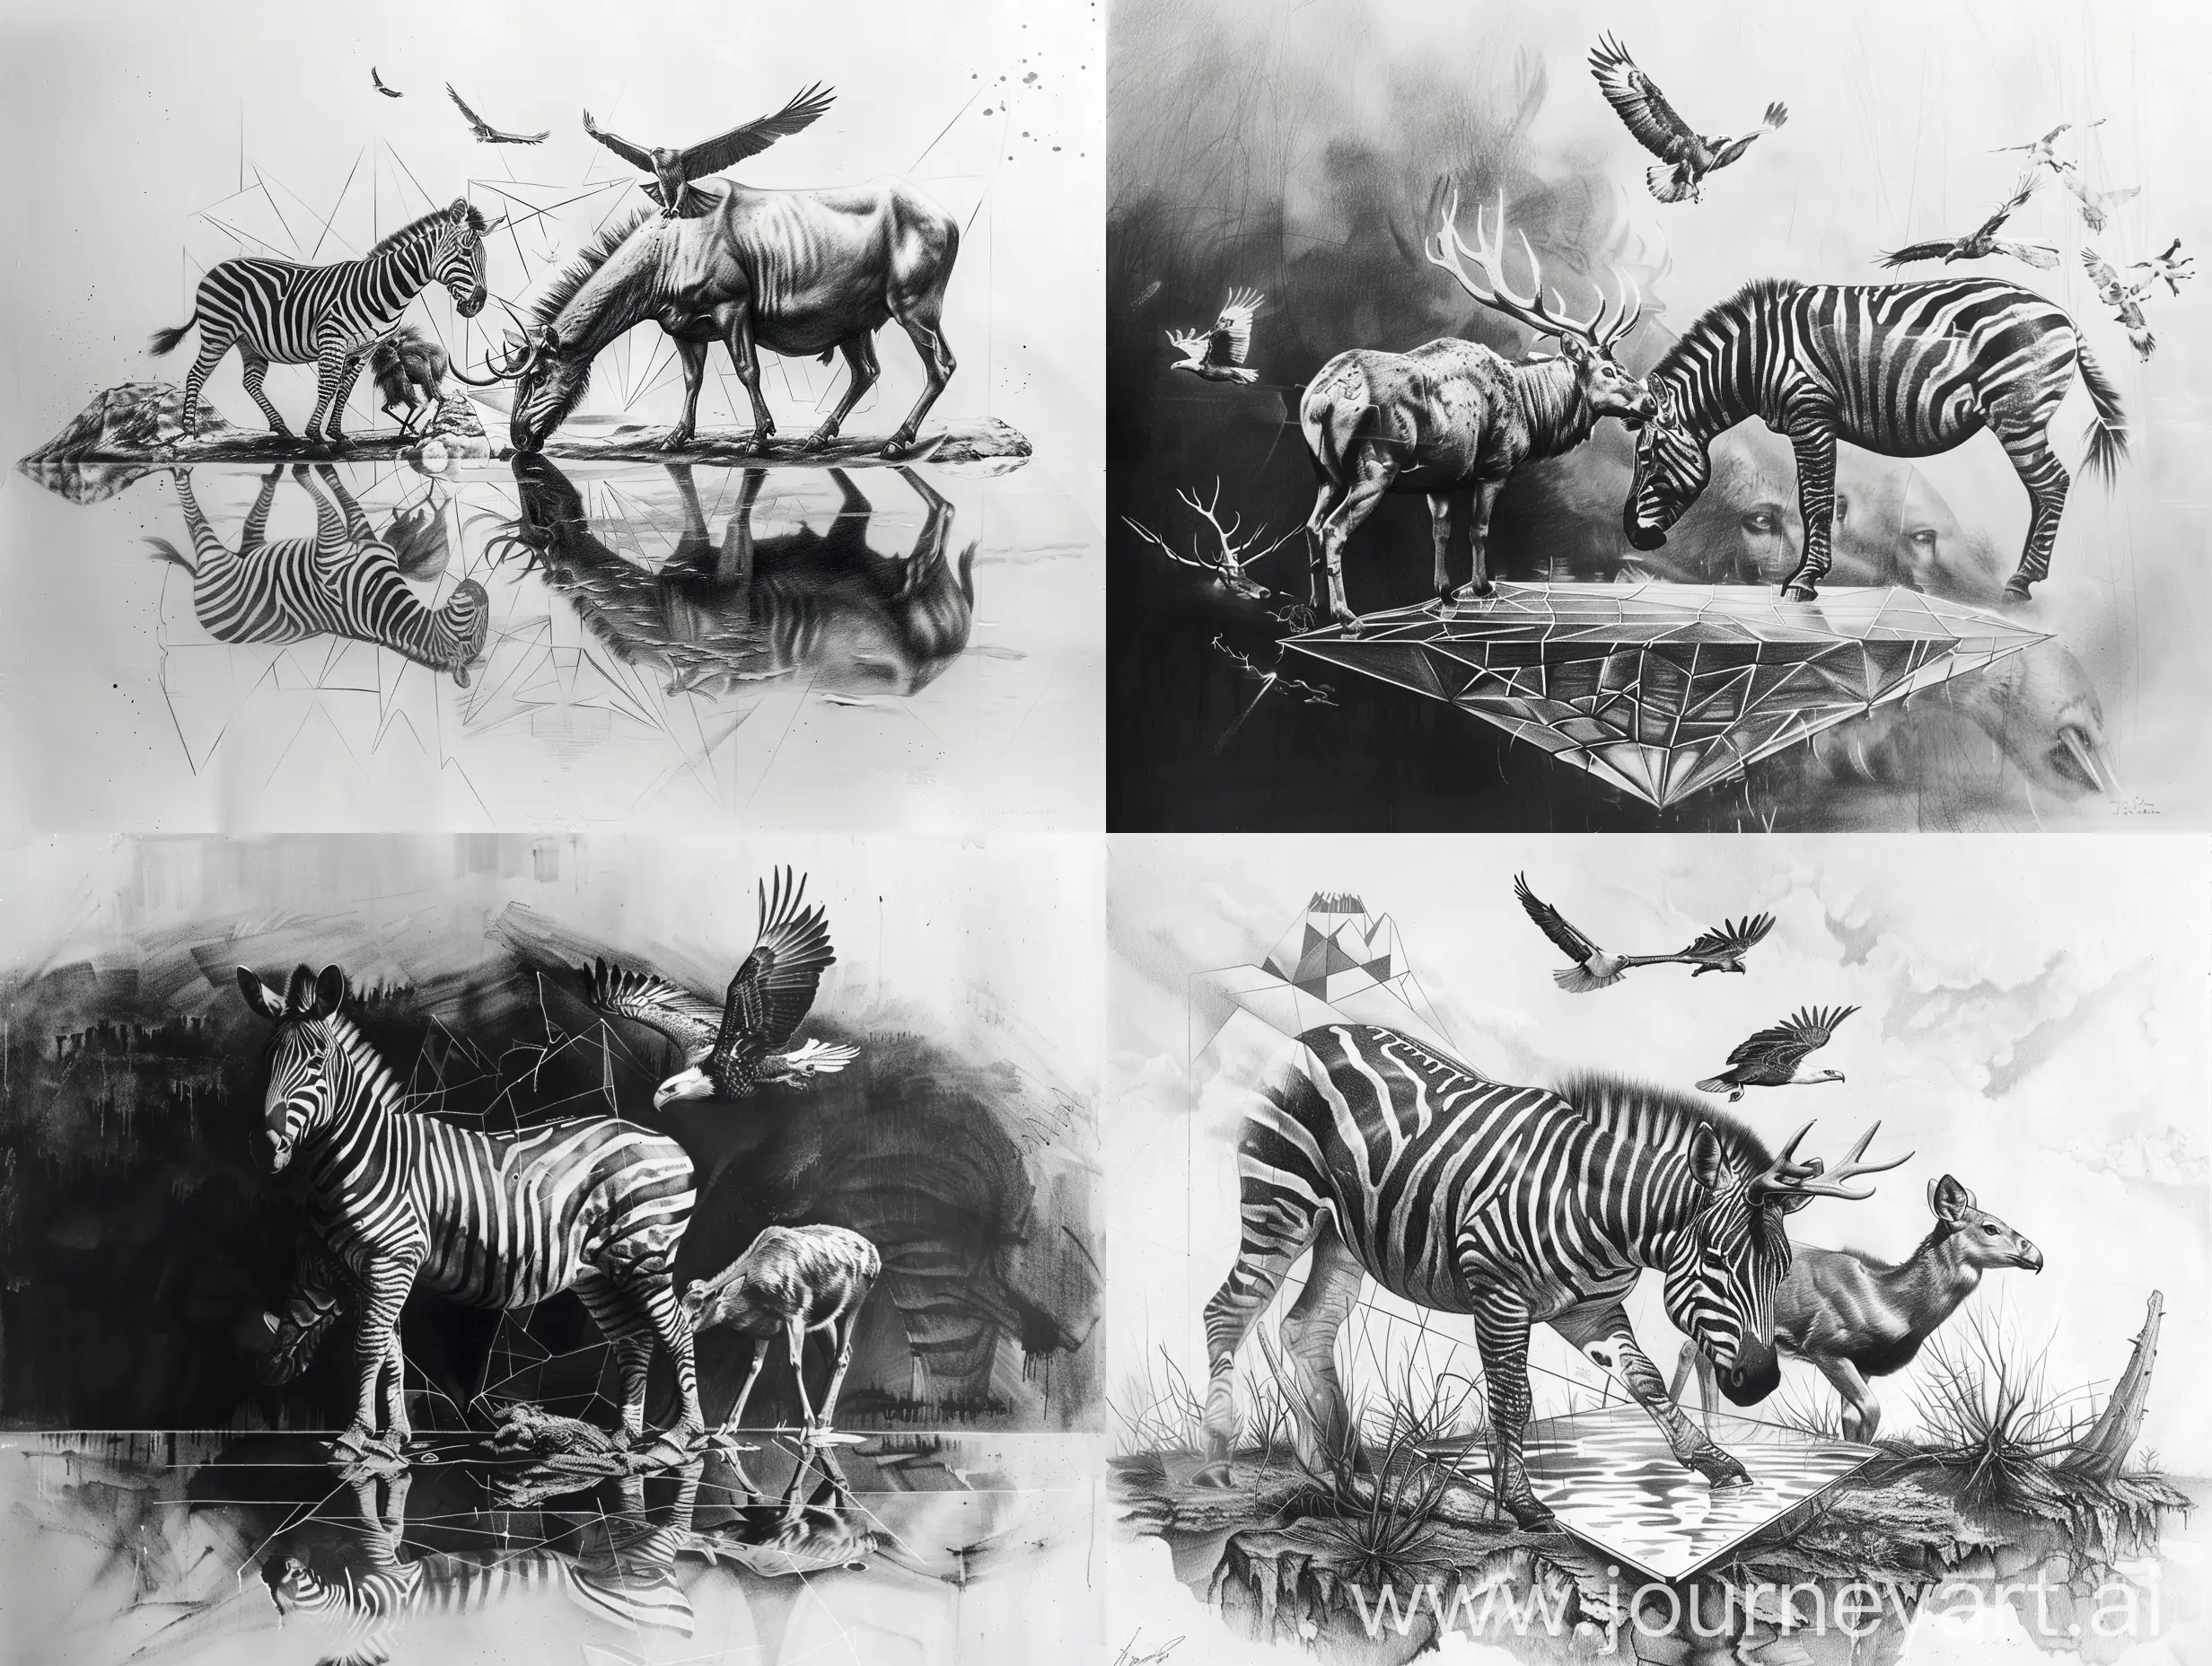 creative dark hyper realistic pencil sketch of a zebra and deer on a glass surface while the  eagles are flying over their head on a large canvas in great details